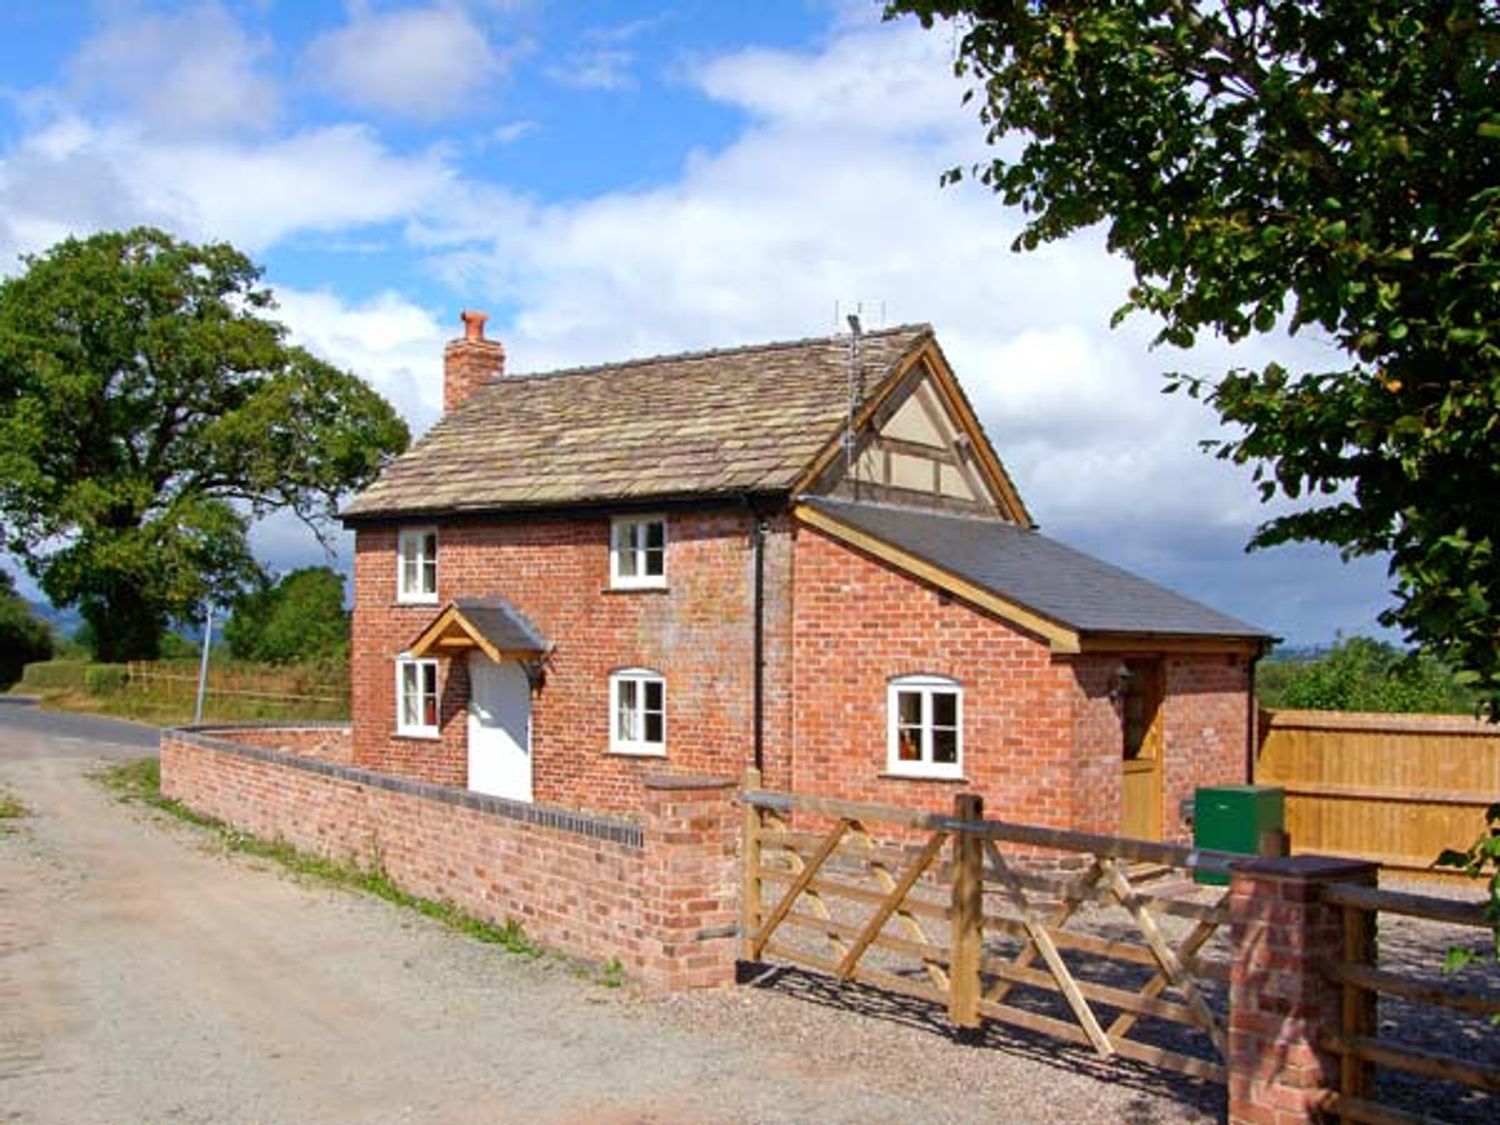 Point Cottage - Herefordshire - 10048 - photo 1